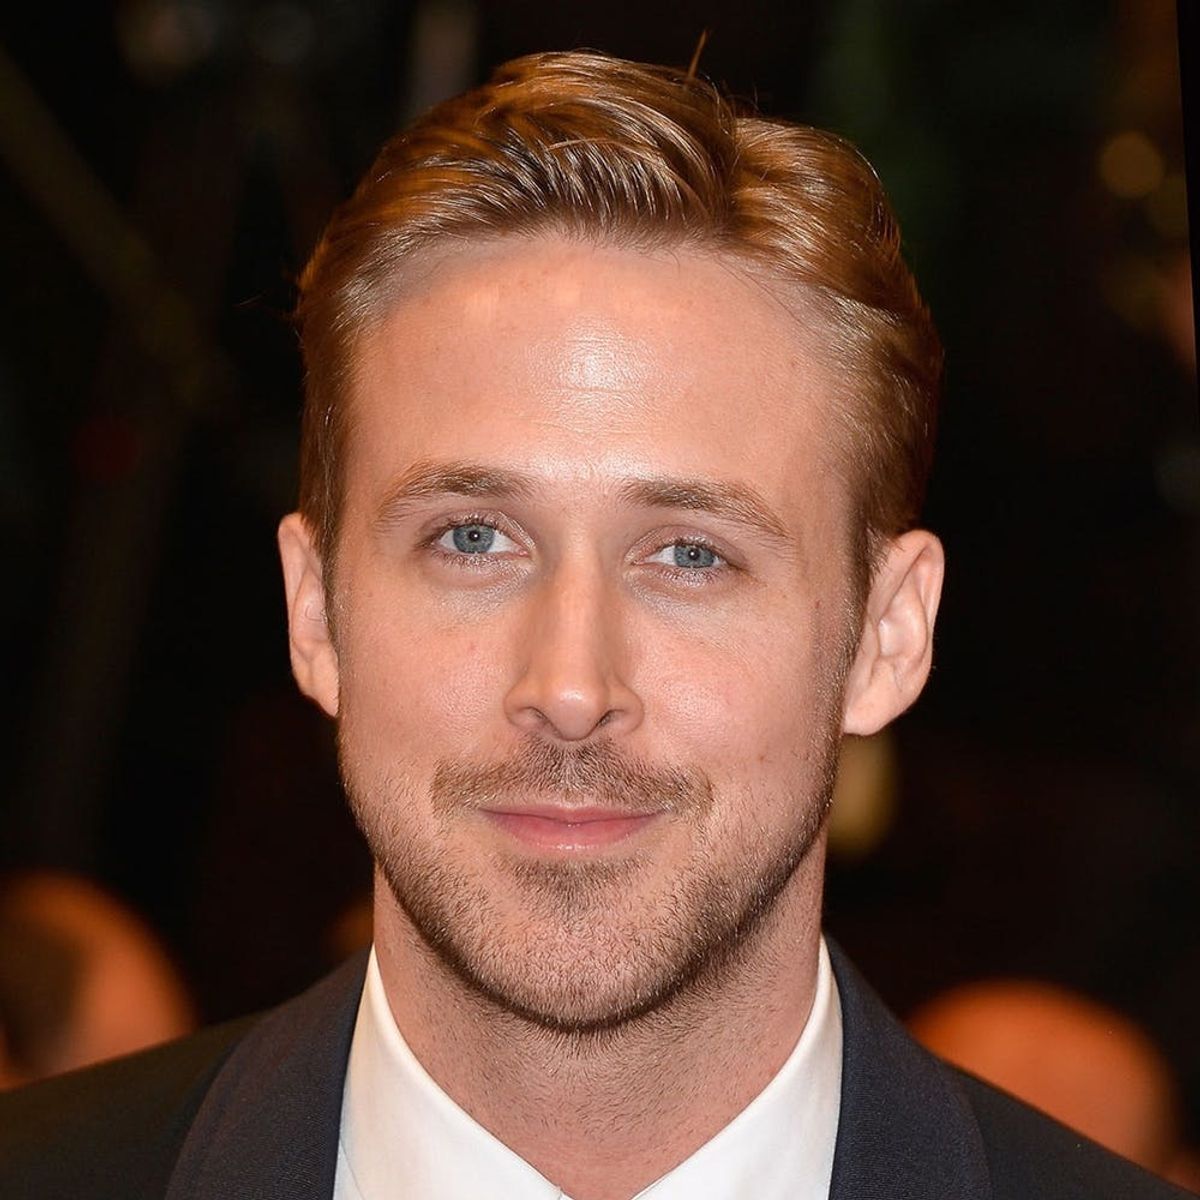 Is Ryan Gosling the Newest Cast Member of Beauty and the Beast?